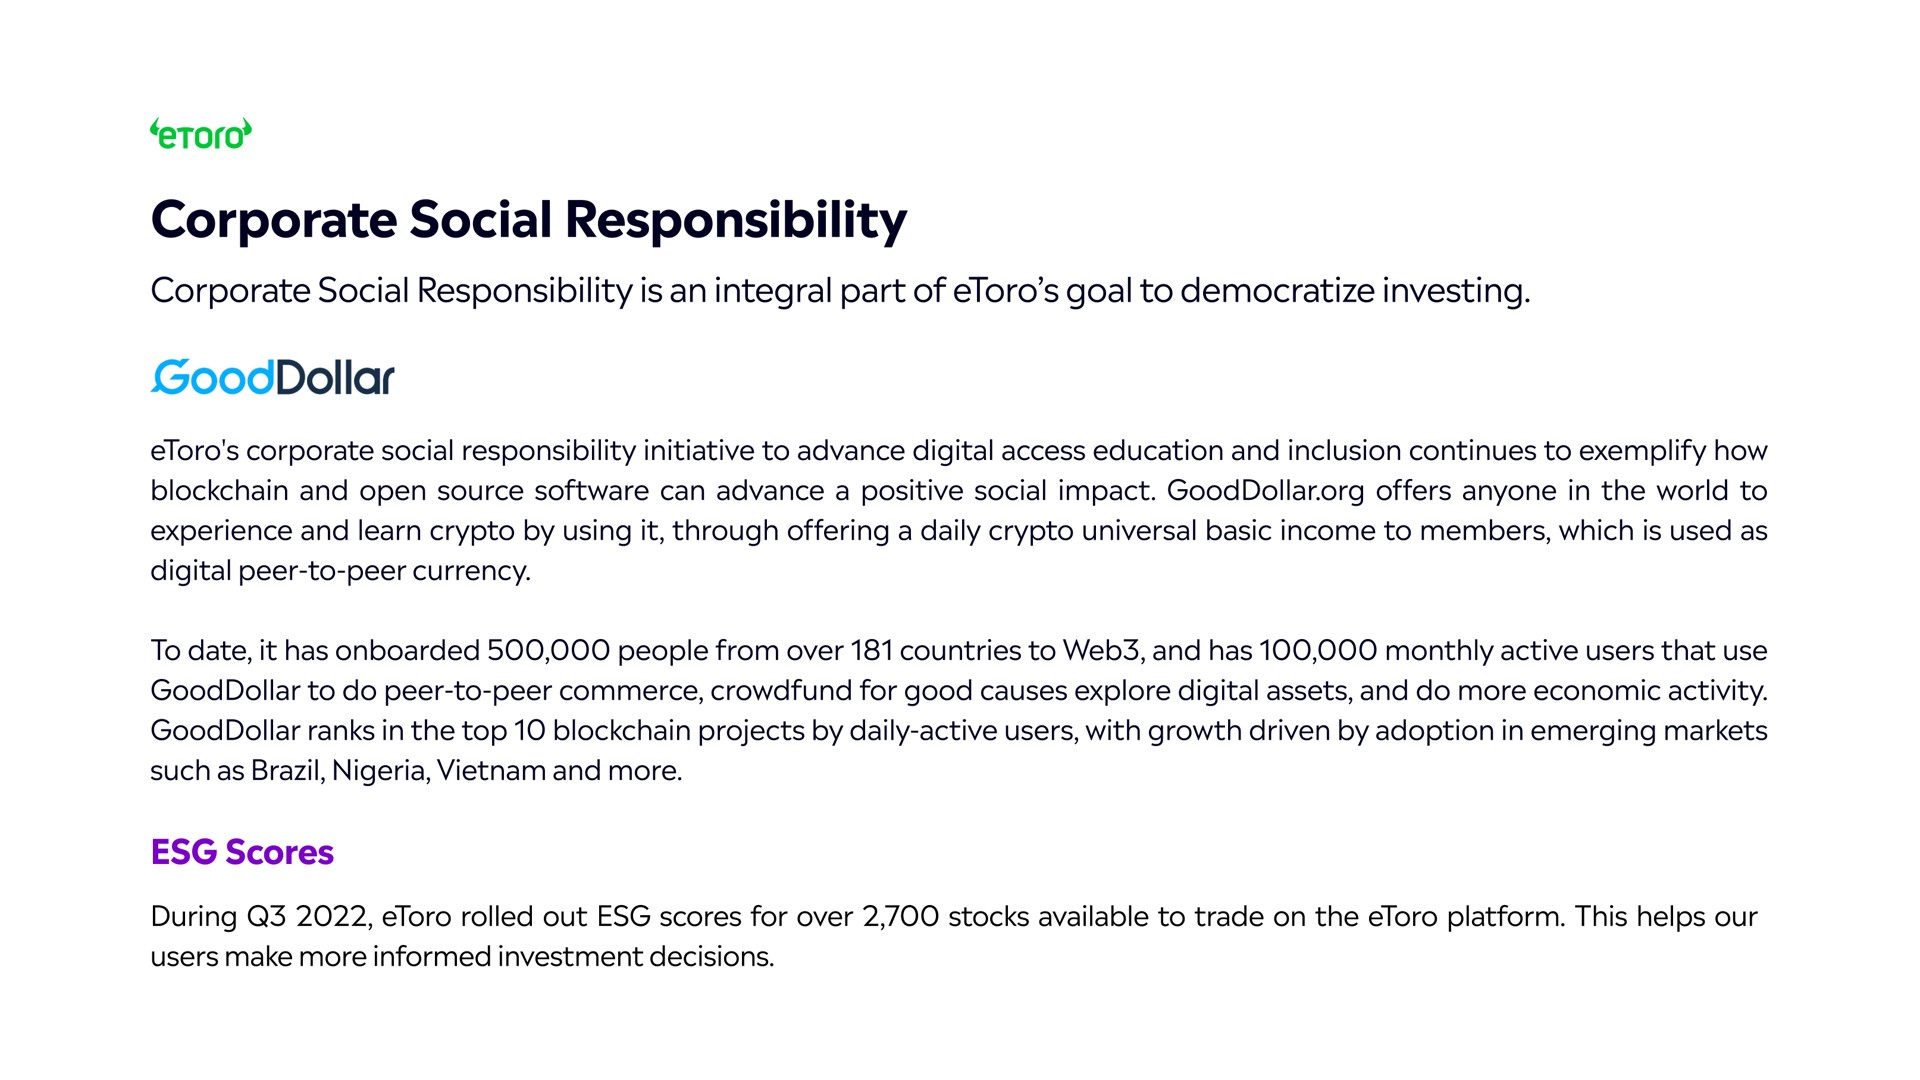 corporate social responsibility is an integral part of goal to democratize investing | eToro